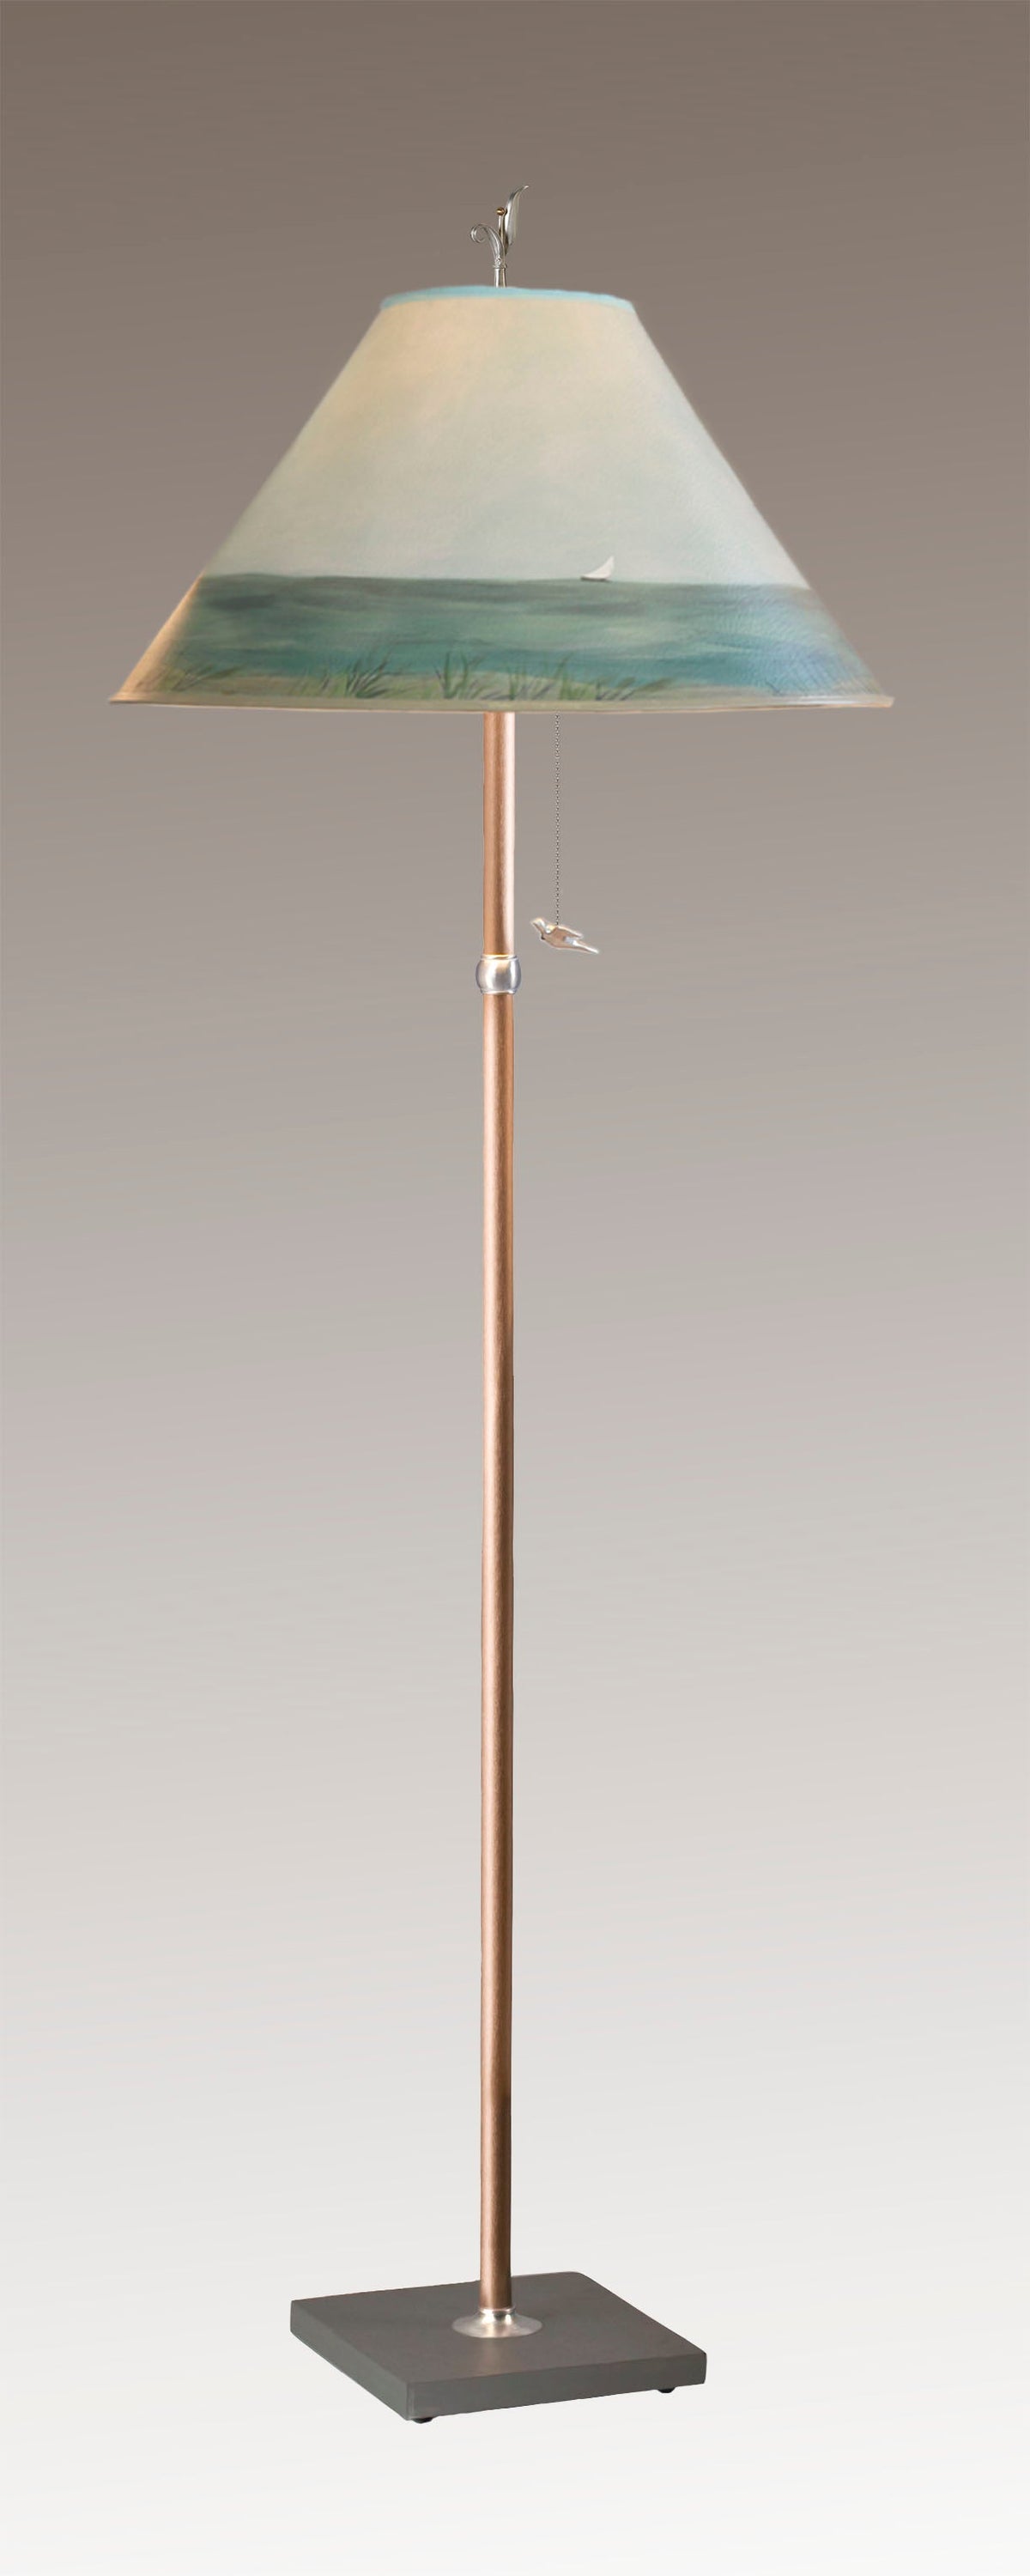 Janna Ugone &amp; Co Floor Lamps Copper Floor Lamp with Large Conical Shade in Shore